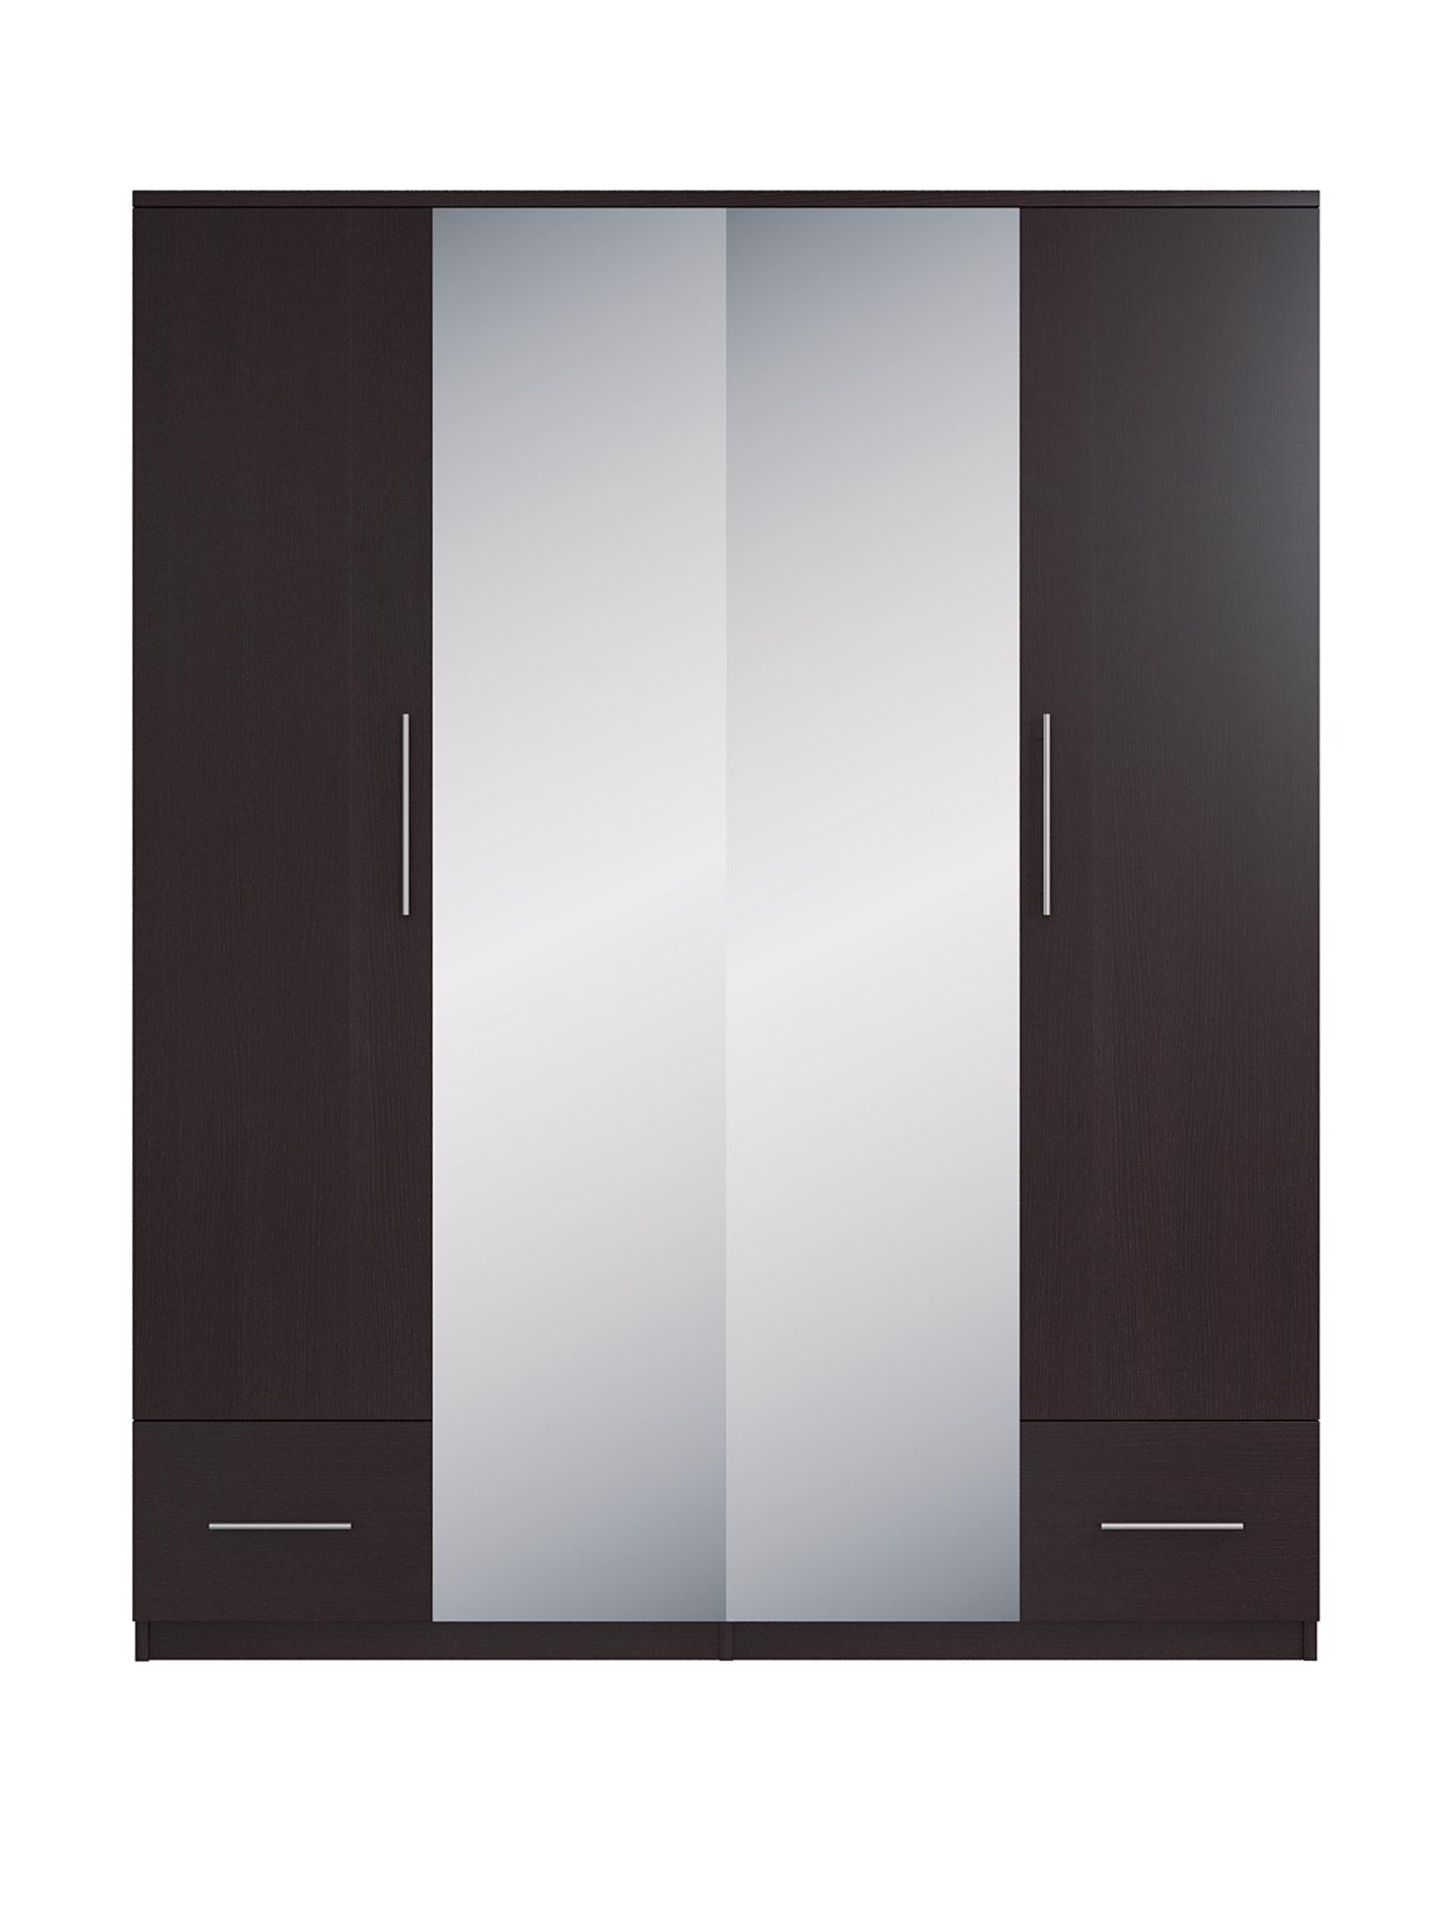 Boxed Item Cologne 4 Doors 2 Drawers Wardrobe [Espresso] 199X160X52Cm Rrp:£454.0 - Image 2 of 2